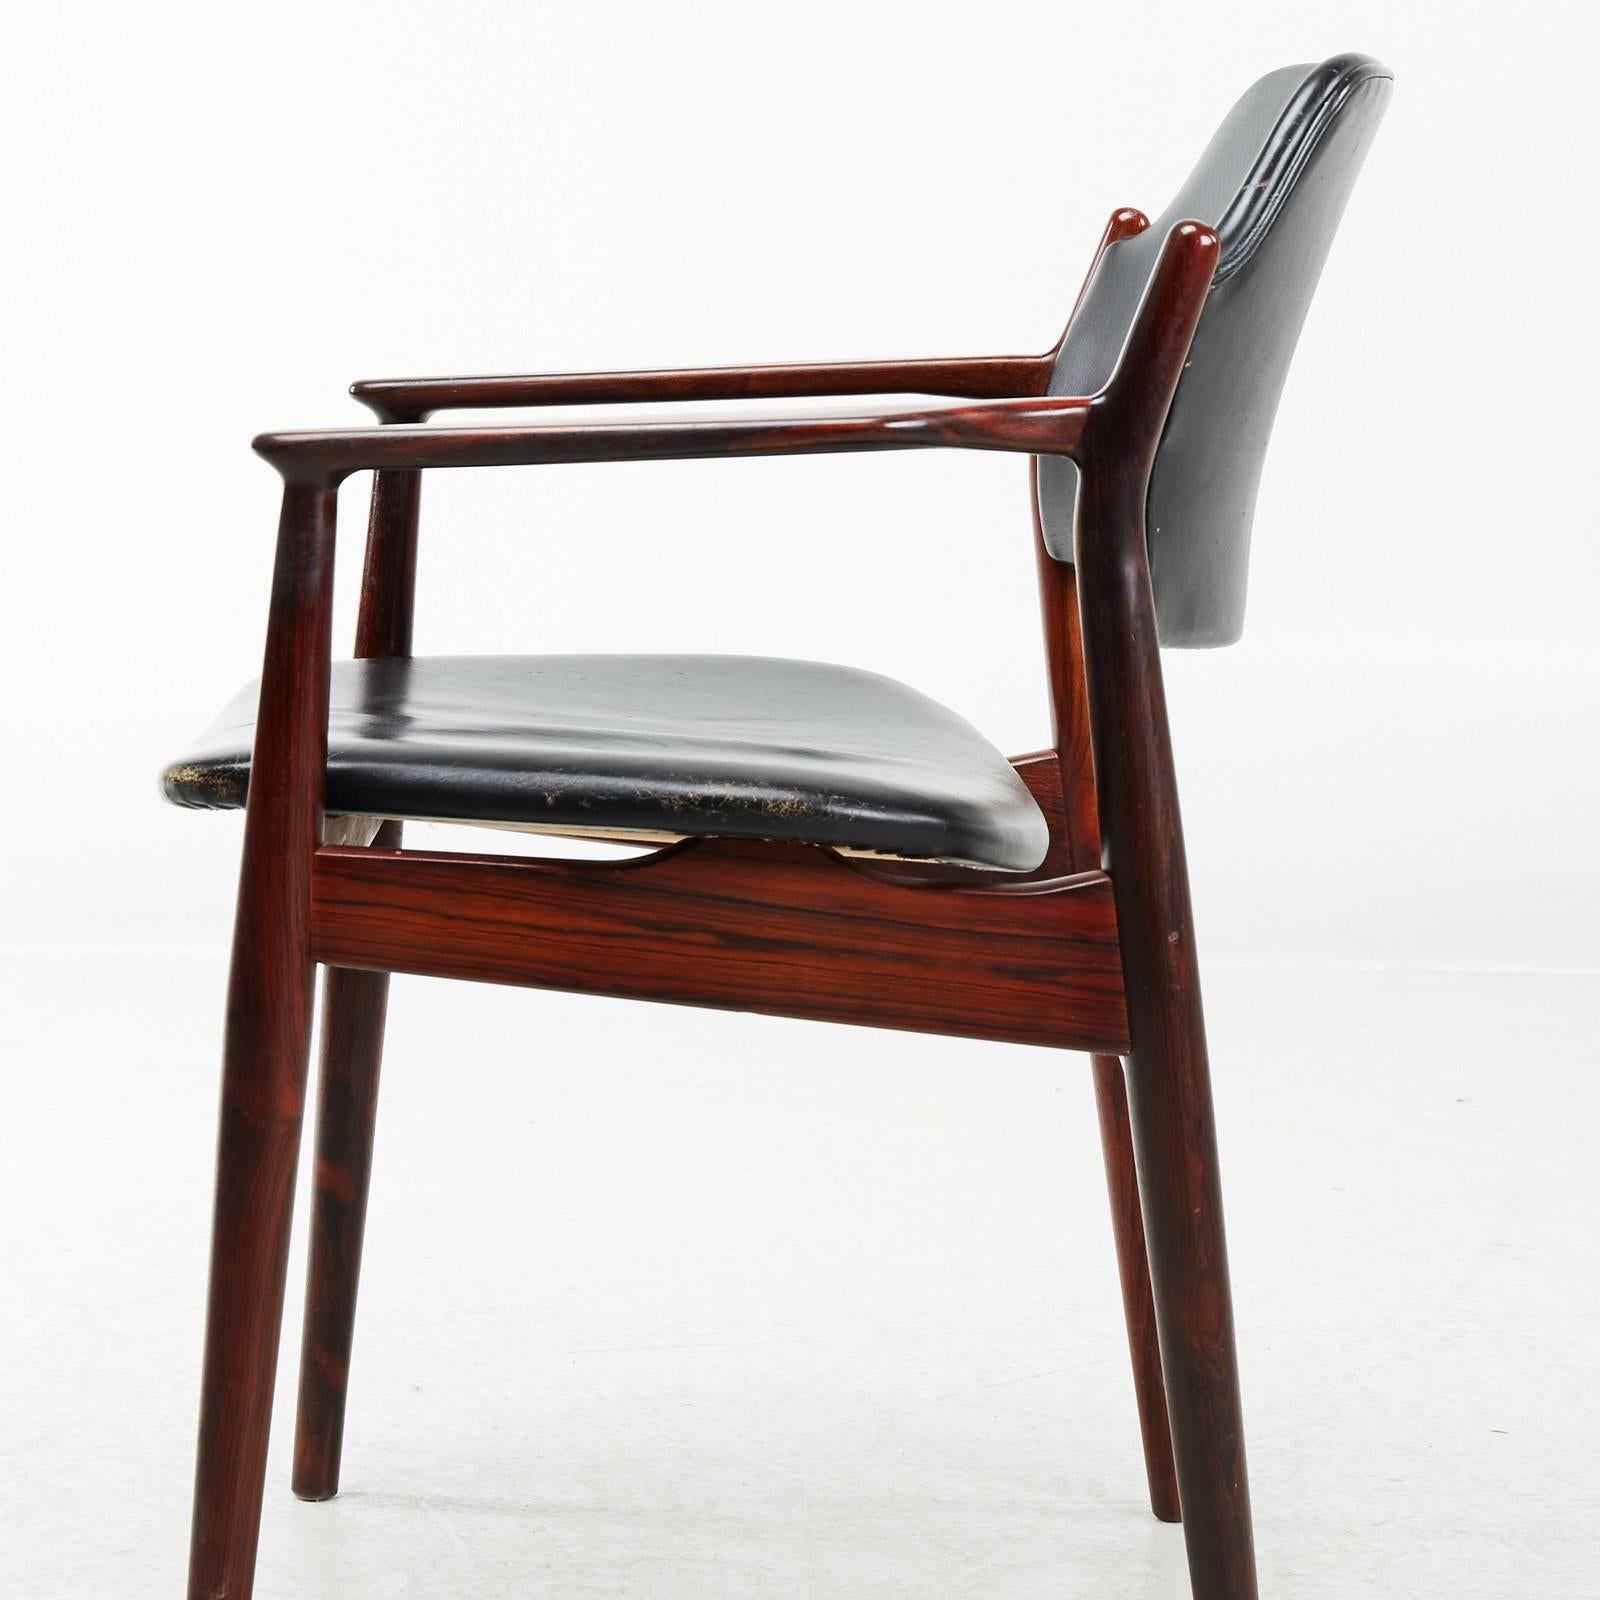 Arne Vodders model 62A armchair was designed in 1961 for Sibast Møbler.

The comfortable armchair in rosewood is in very good condition with refinished frame and original leather upholstery.  The chair is evidence of what good designers and skilled